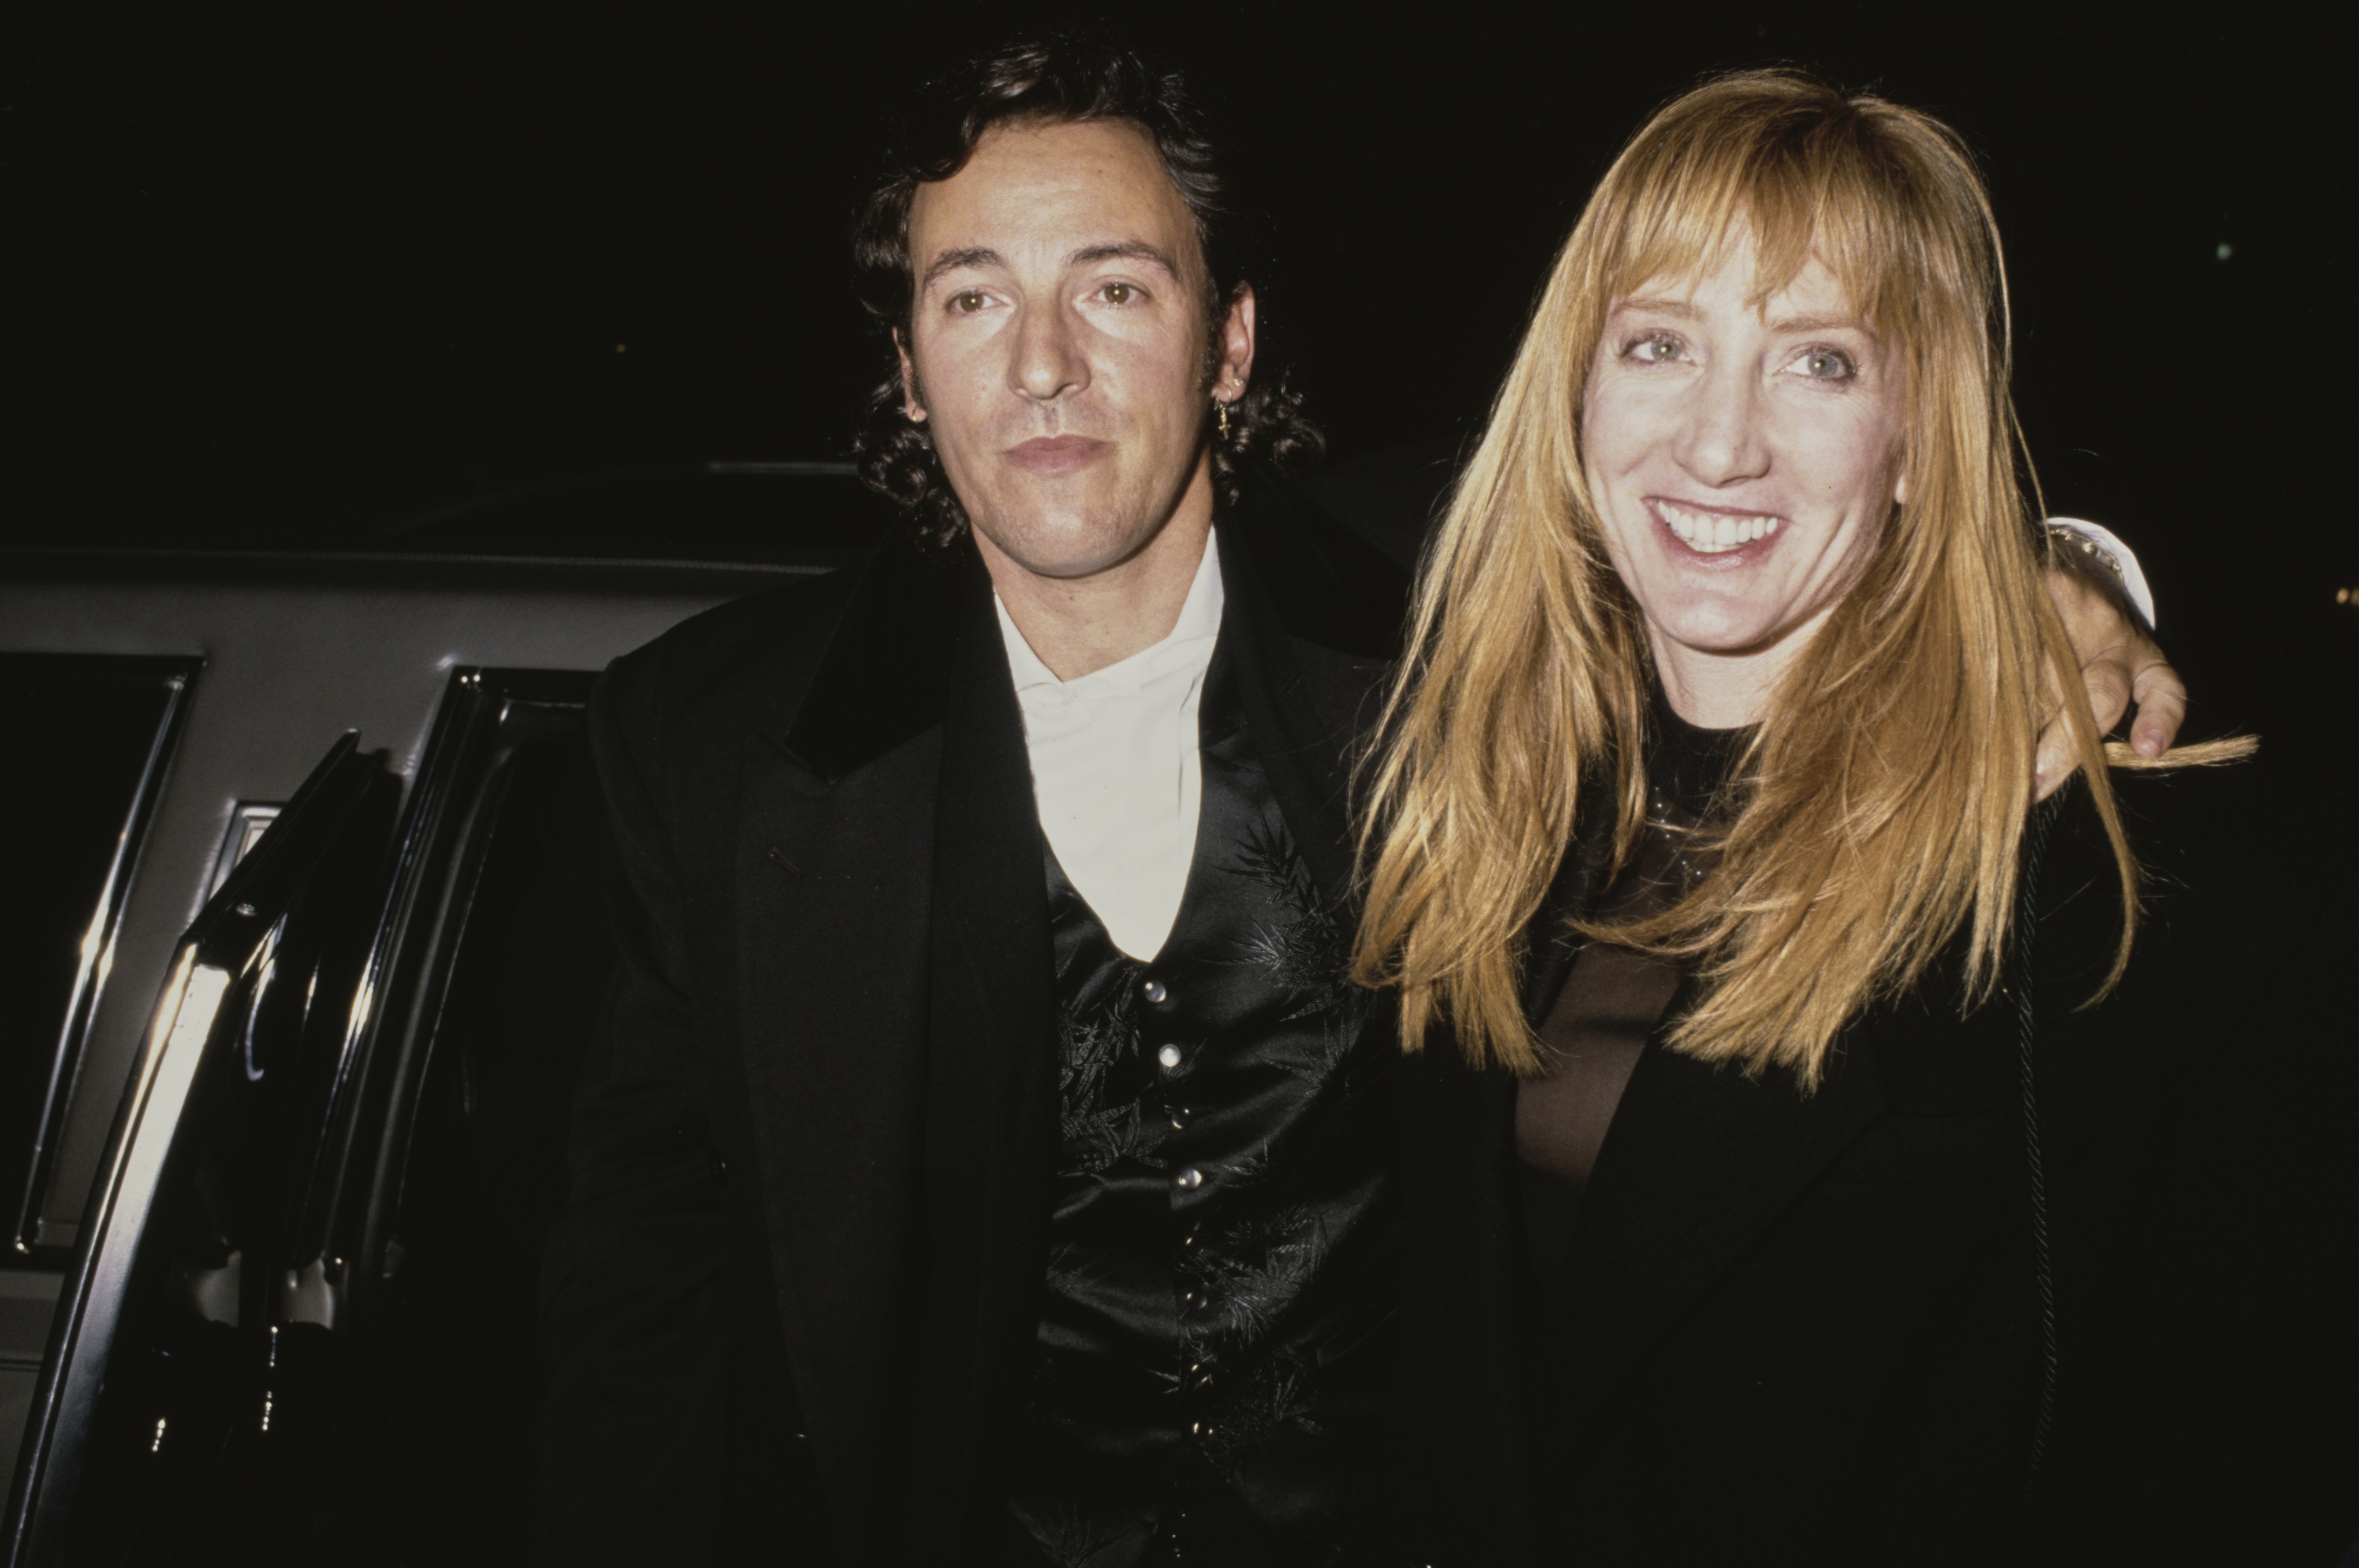 Singer Bruce Springsteen and his partner Patti Scialfa attend the 5th Annual Rock & Roll Hall of Fame induction ceremony in New York City, USA, 17th January 1990 | Source: Getty Images